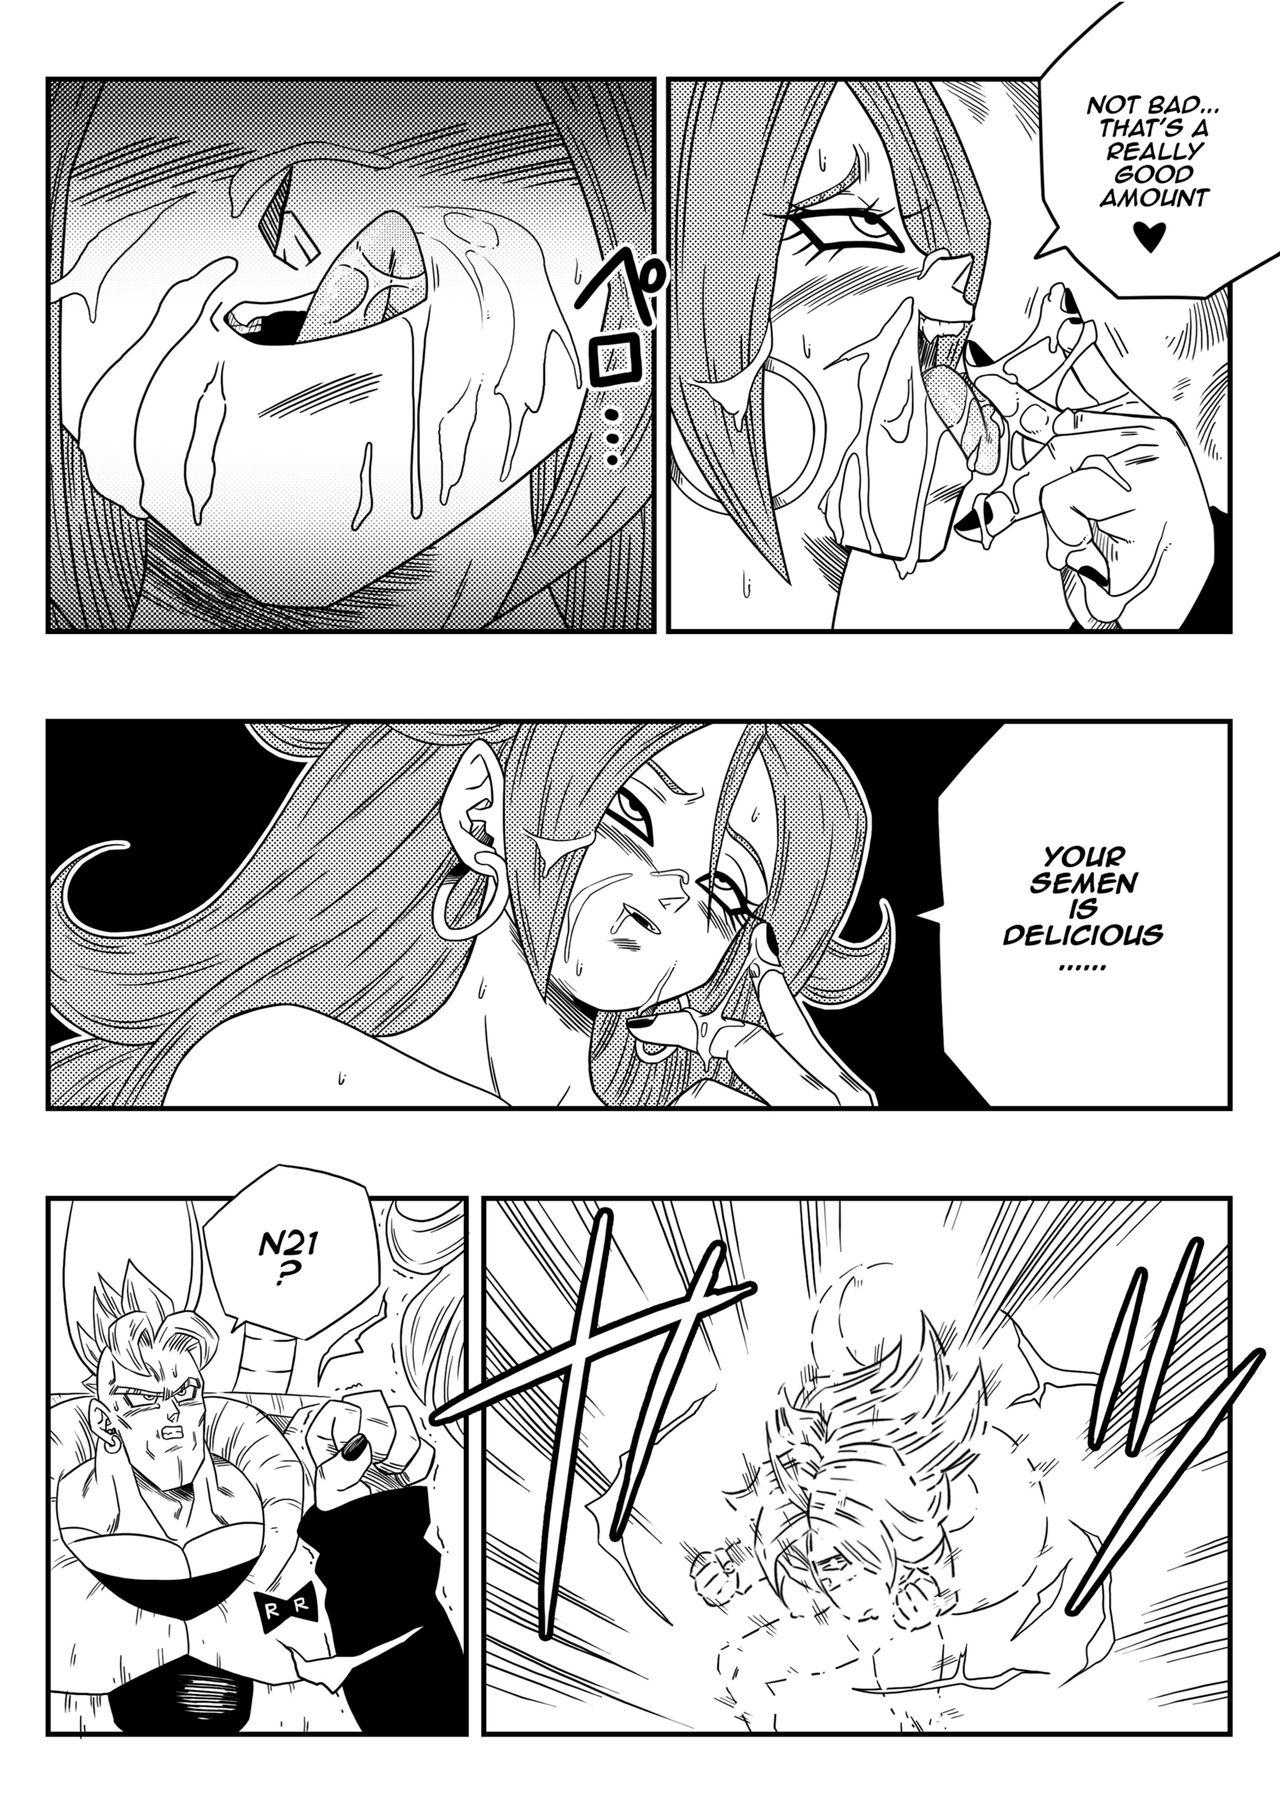 Amatures Gone Wild Kyonyuu Android Sekai Seiha o Netsubou!! Android 21 Shutsugen!! | Busty Android Wants to Dominate the World! - Dragon ball Office - Page 9